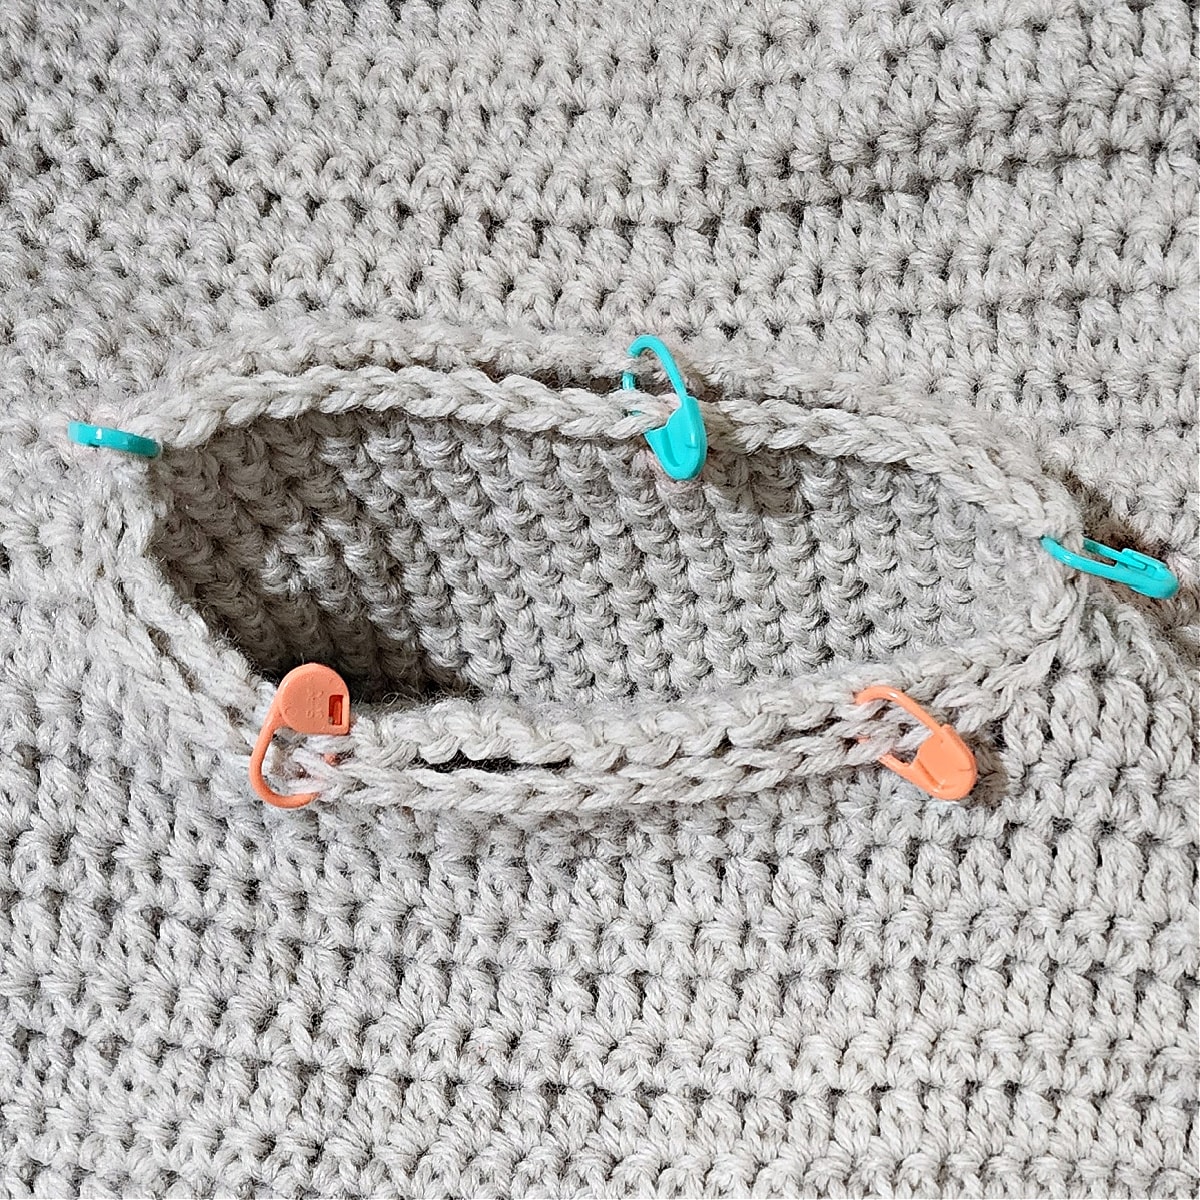 Tutorial photo shows the pocket inserted into the opening on the cardigan and locking stitch markers holding it in place for seaming.